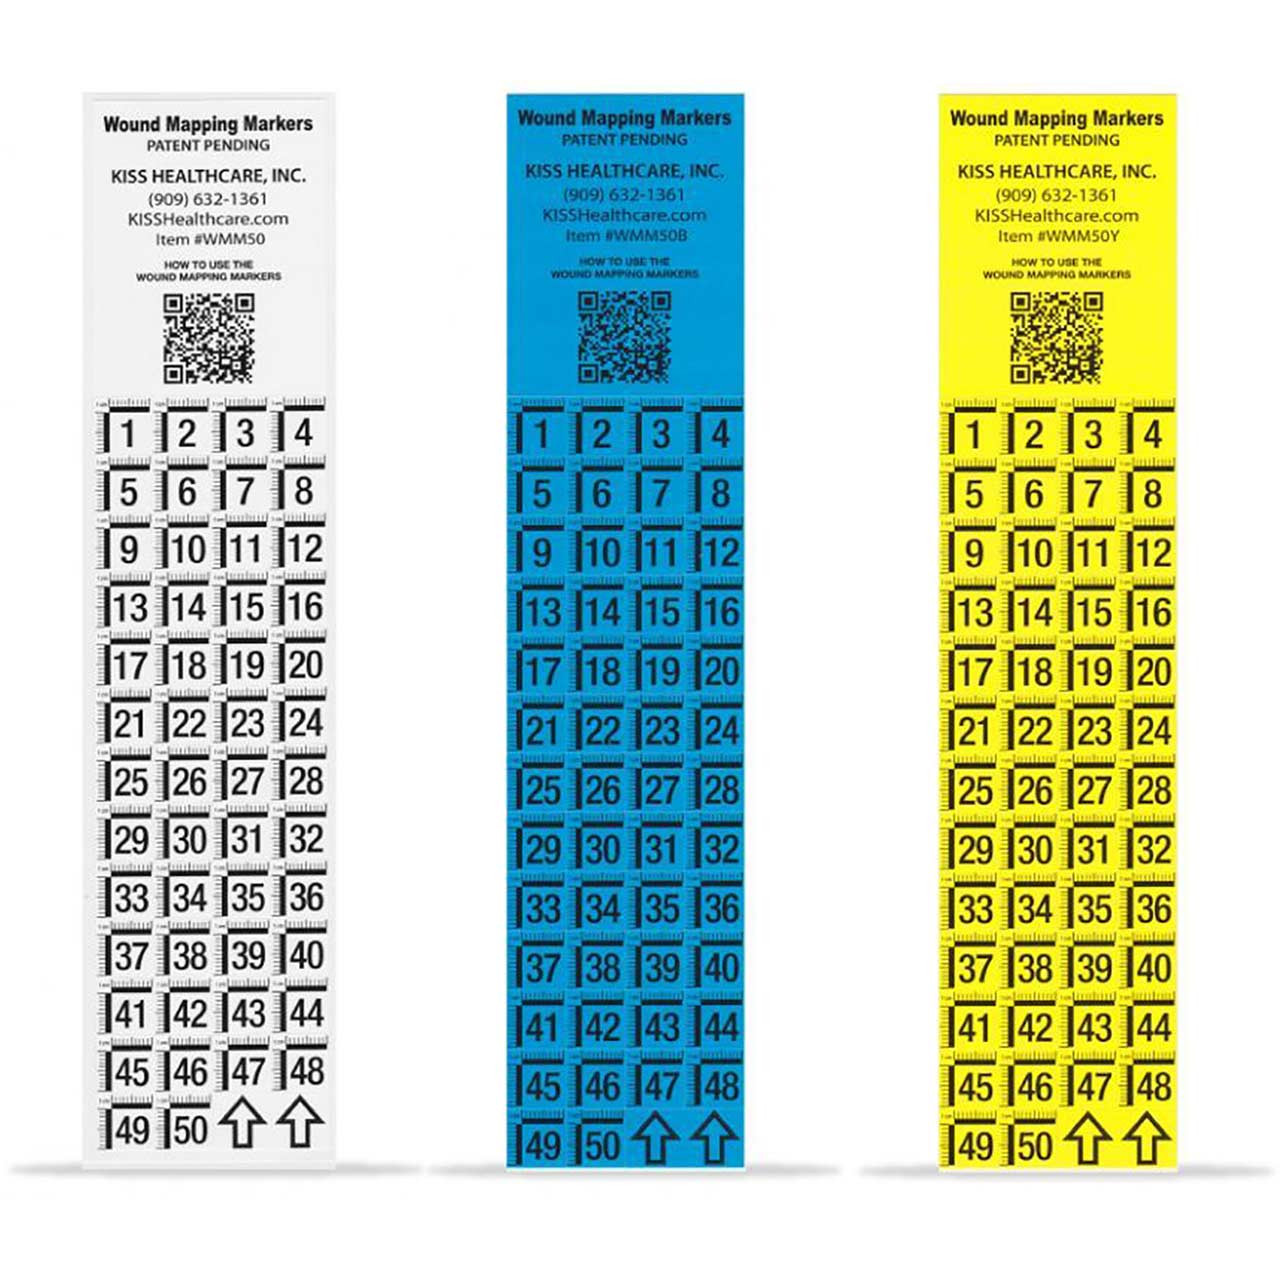 WMM50 Wound Mapping Marker - 100 sheets - White, Yellow, or Blue